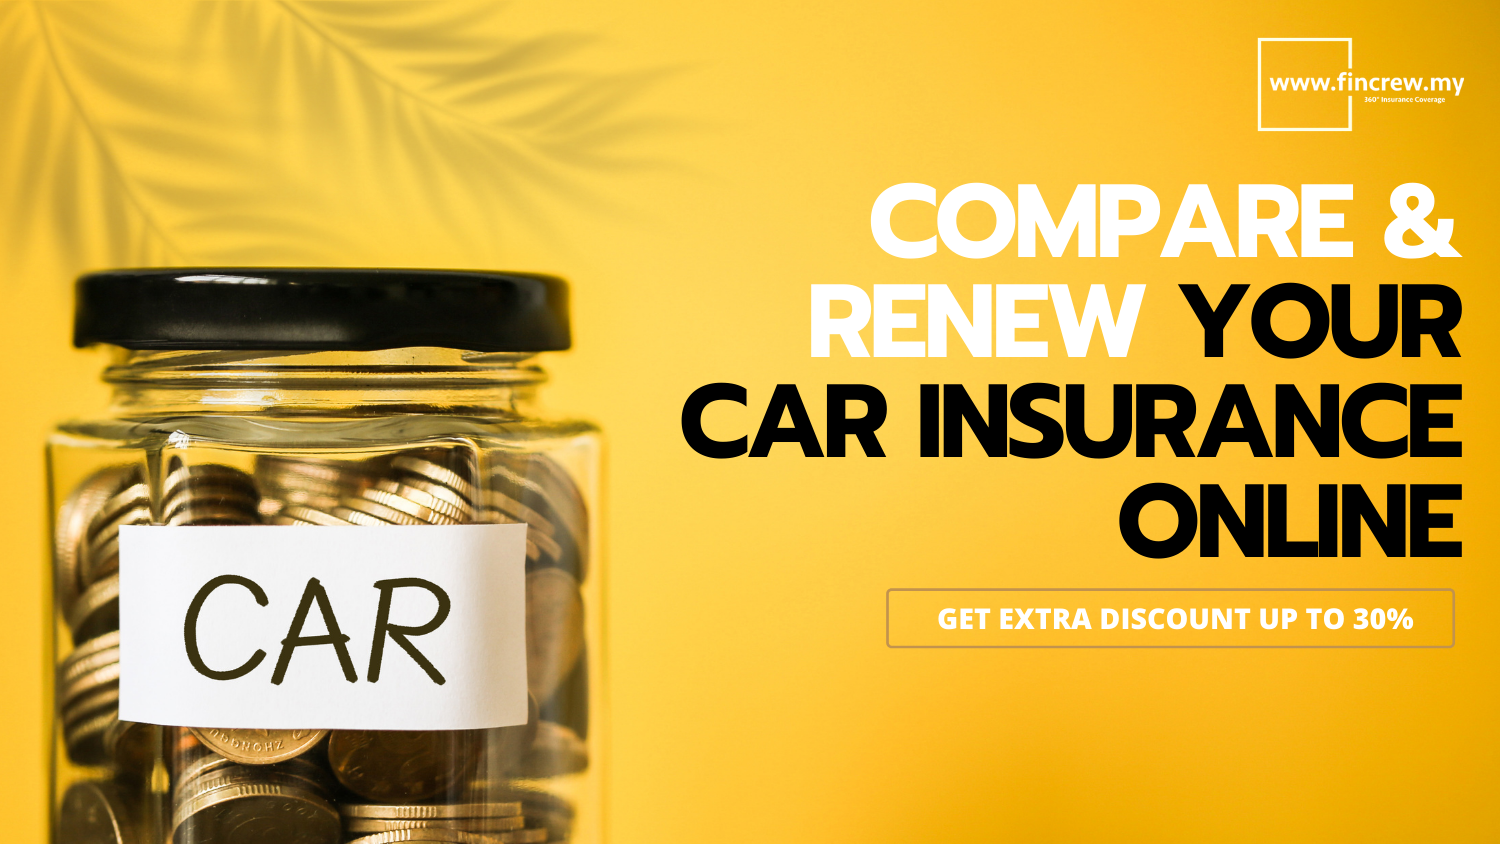 Compare & Renew Your Car Insurance Online blog Featured Image